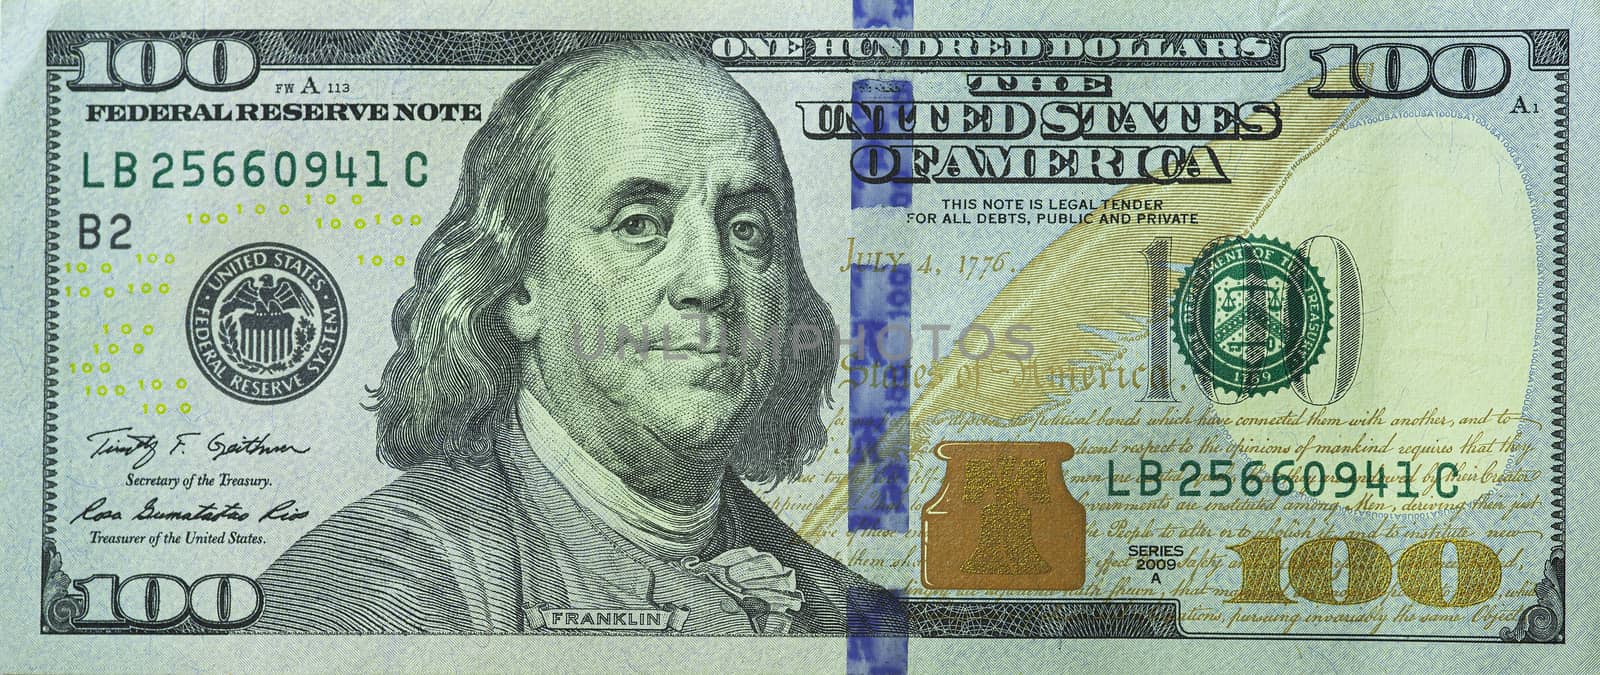 Isolated image of One hundred dollar bill new model, front side